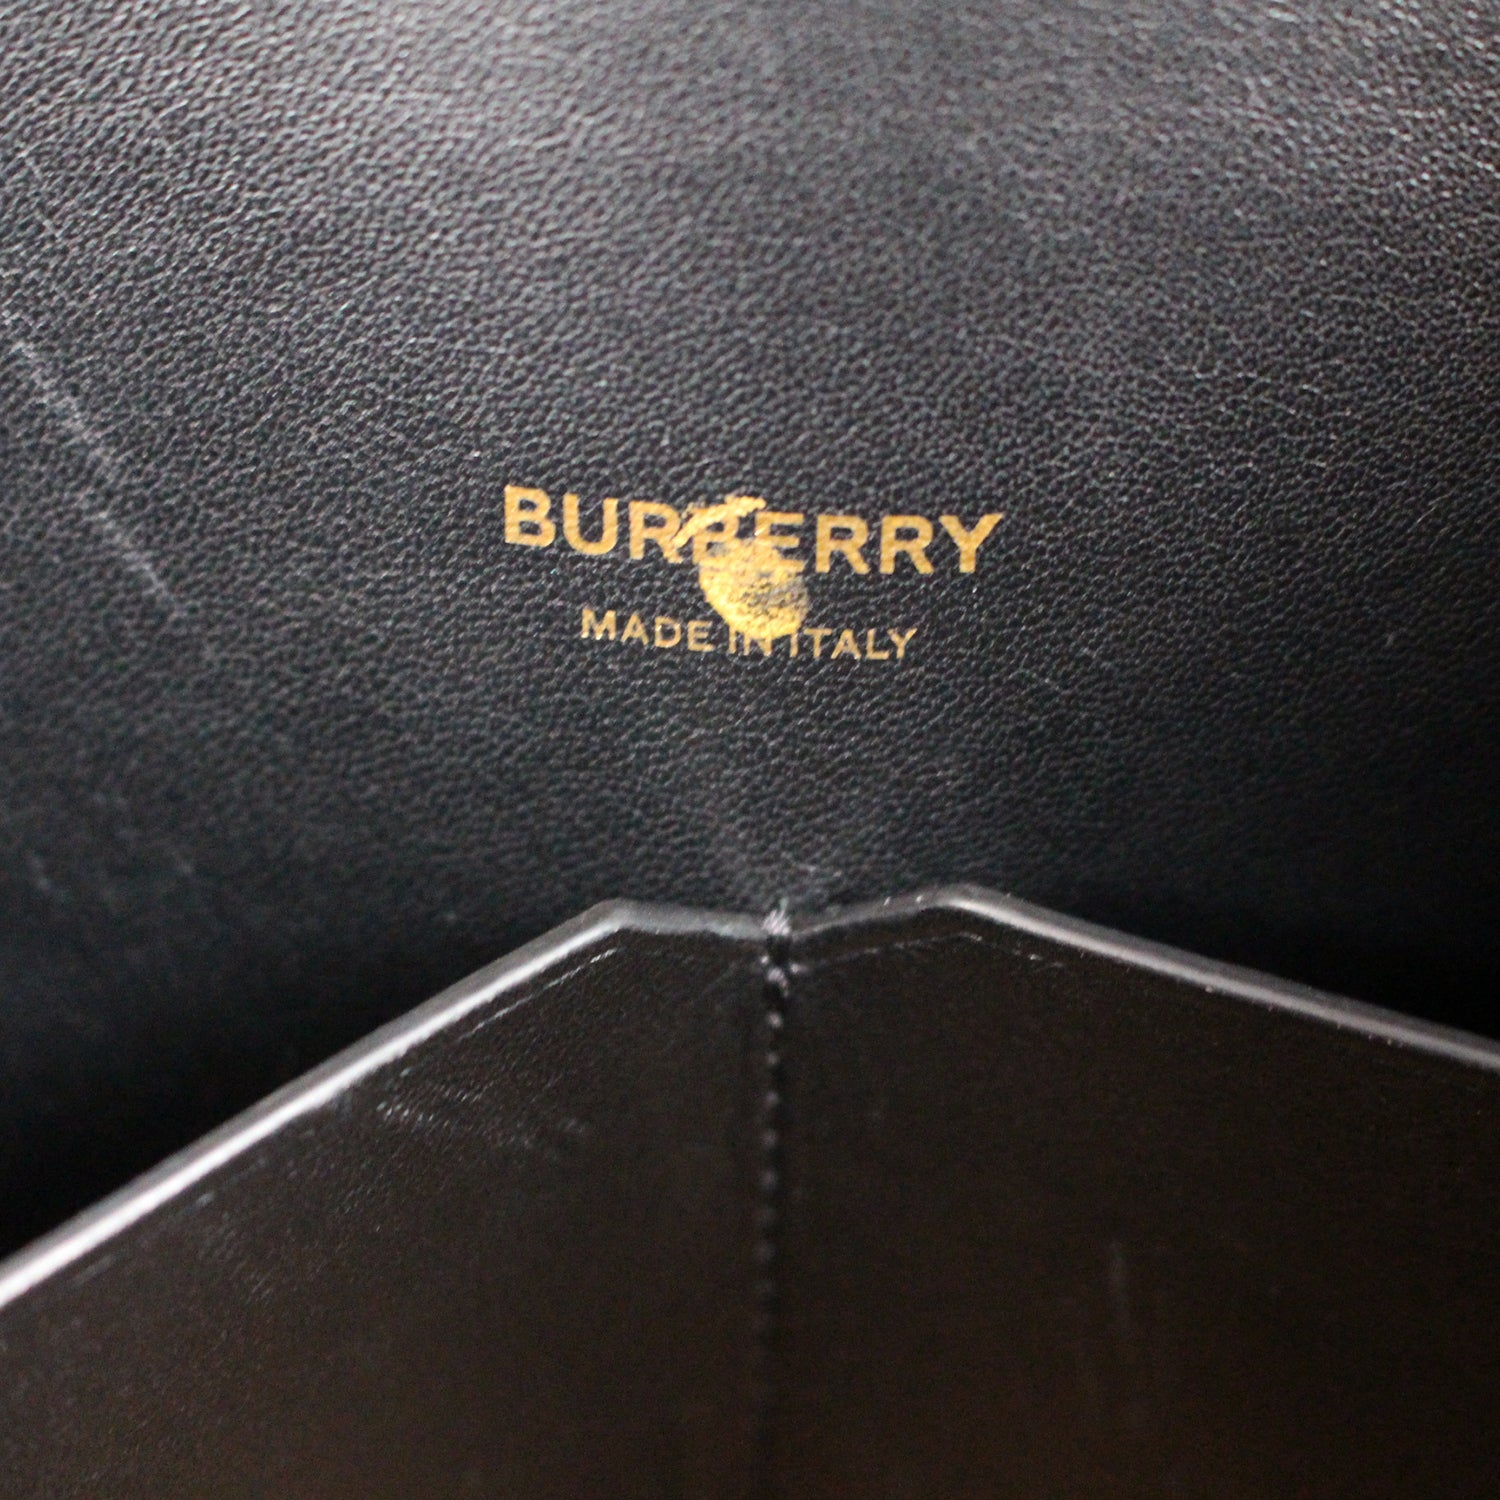 NEW BURBERRY BLACK CALF LEATHER LARGE SIZE LOGO SOCIETY TOTE BAG